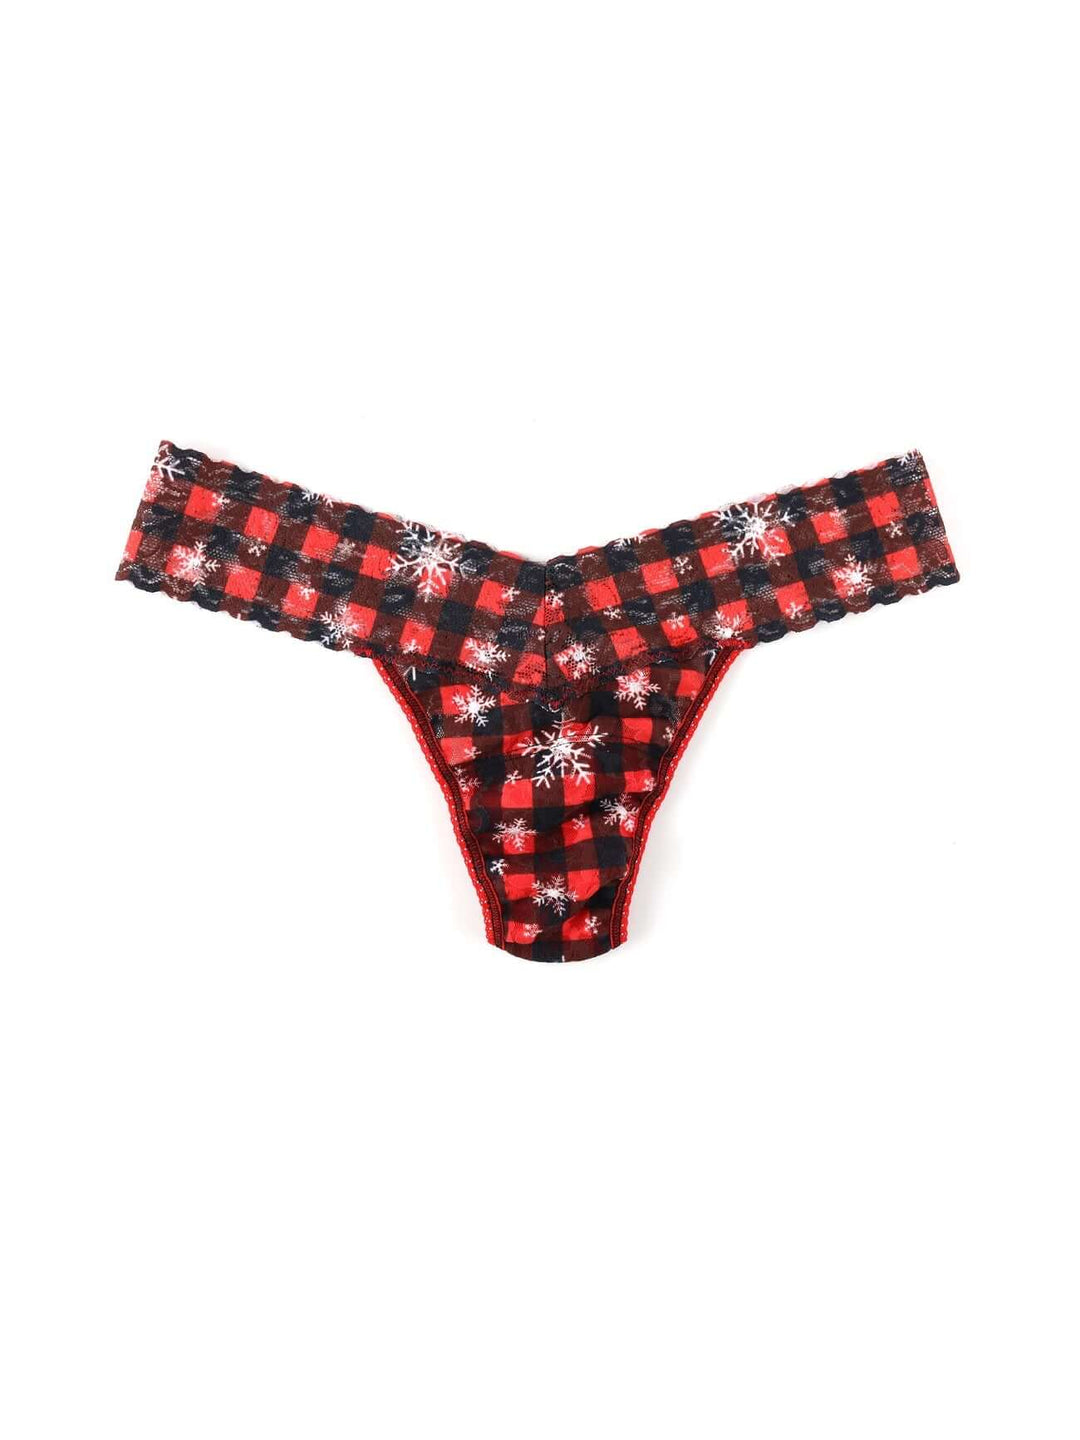 Hanky Panky Printed Lace Low Rise Thong Color: Home for the Holidays  at Petticoat Lane  Greenwich, CT